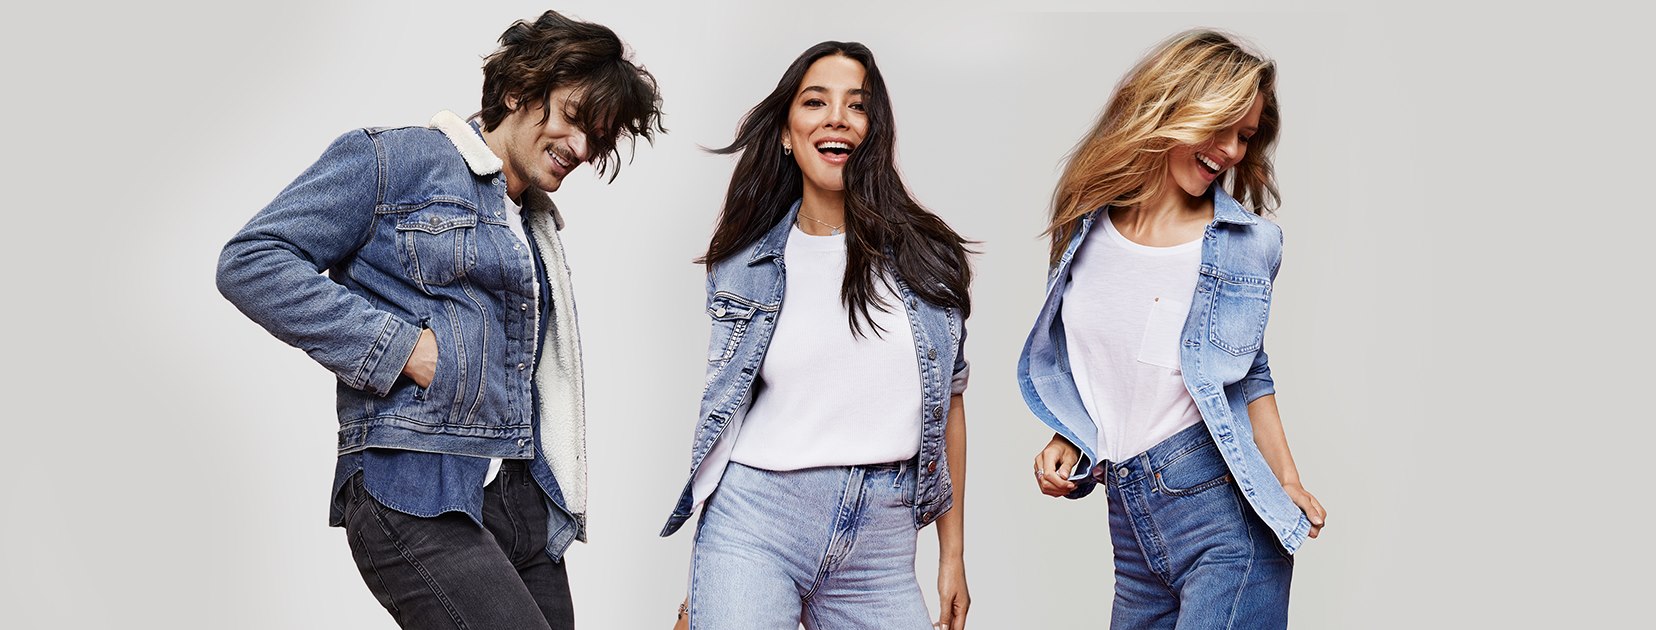 Just Jeans get extra 10% OFF when you sign up